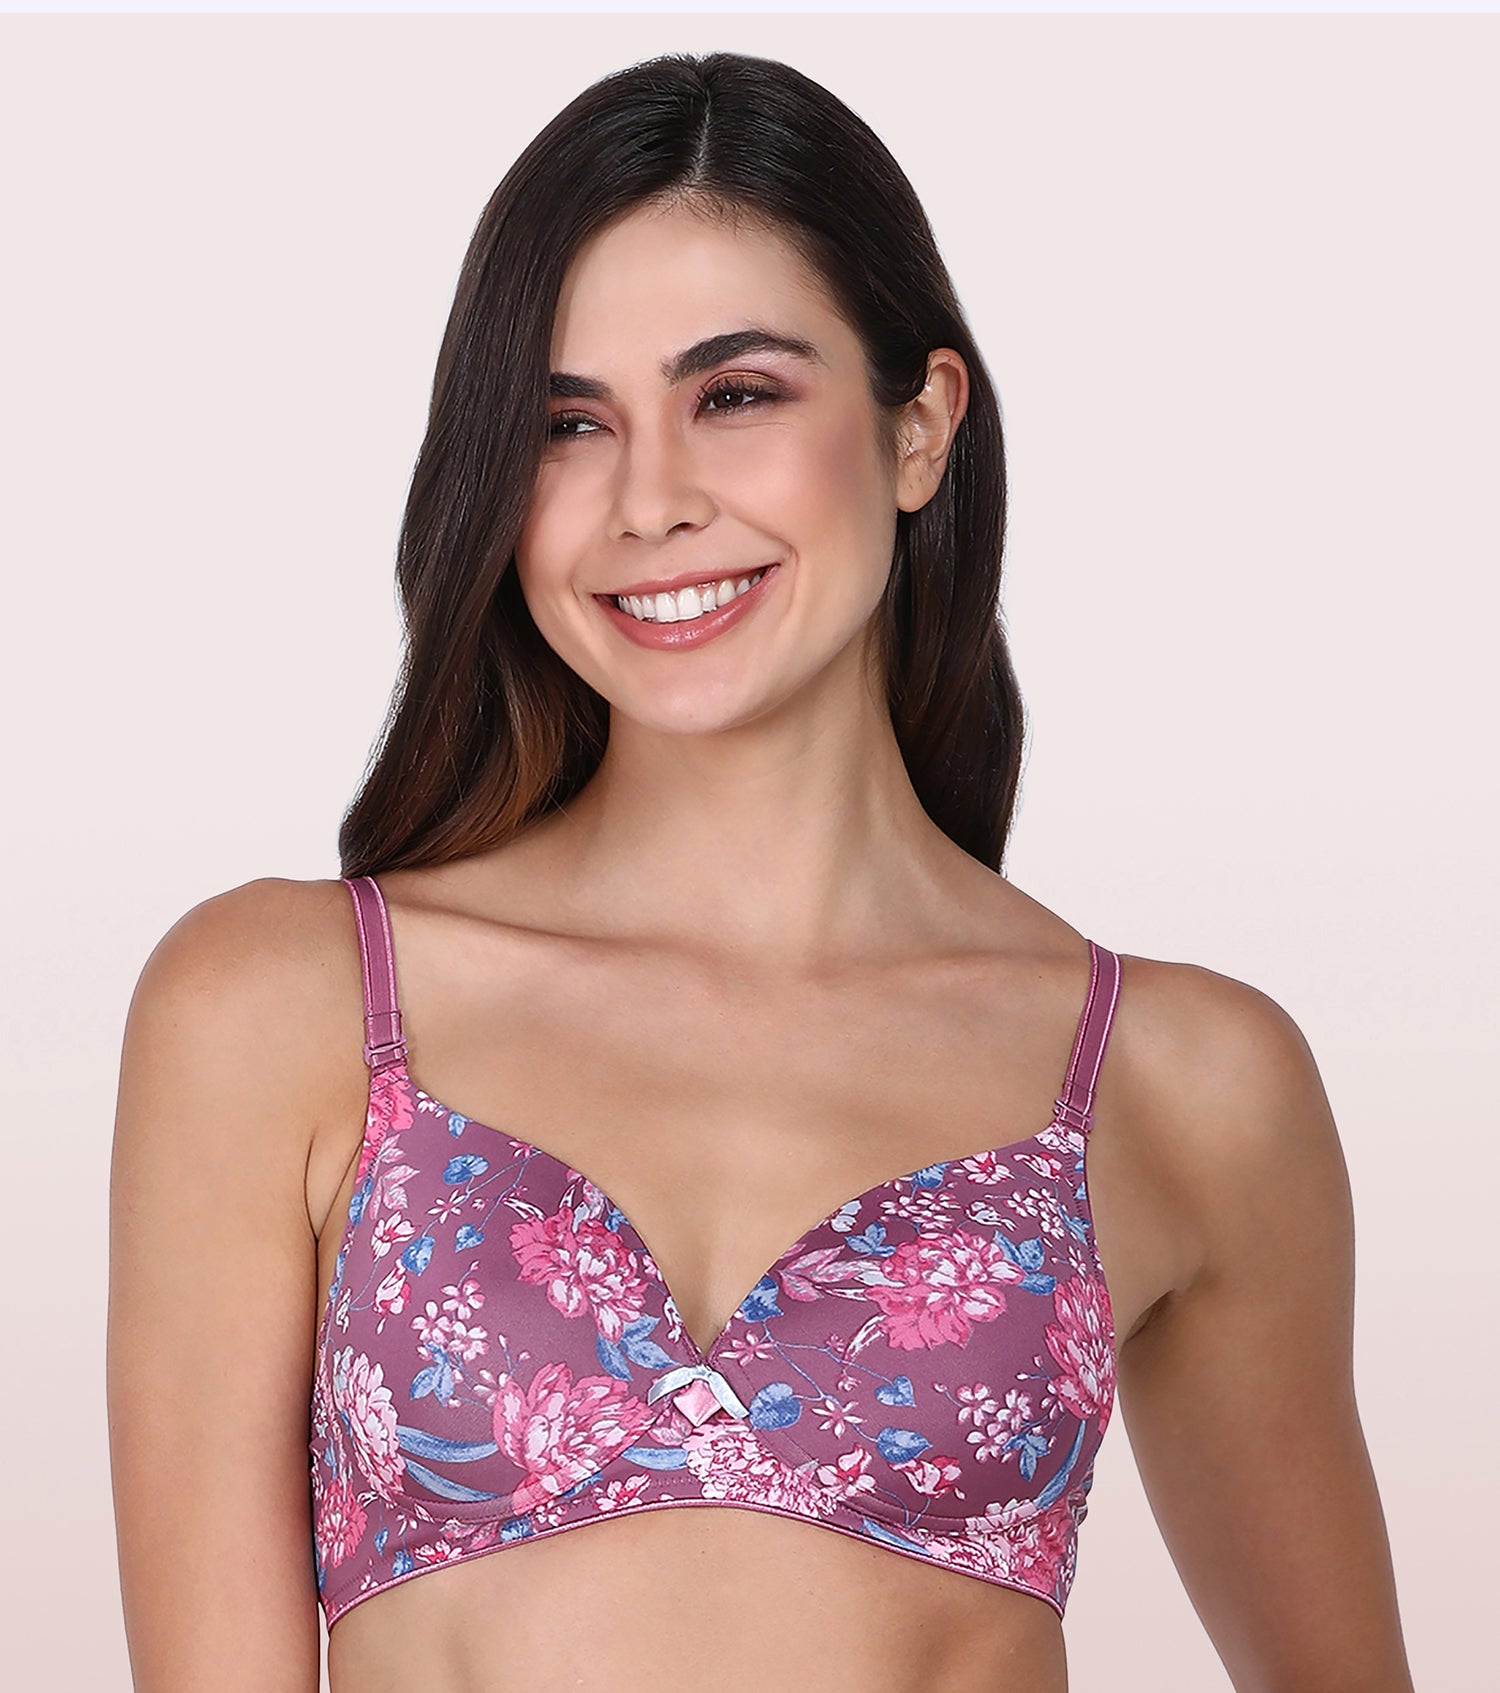 Enamor F065 Full Support T-Shirt Bra - The online shopping beauty store.  Shop for makeup, skincare, haircare & fragrances online at Chhotu Di Hatti.